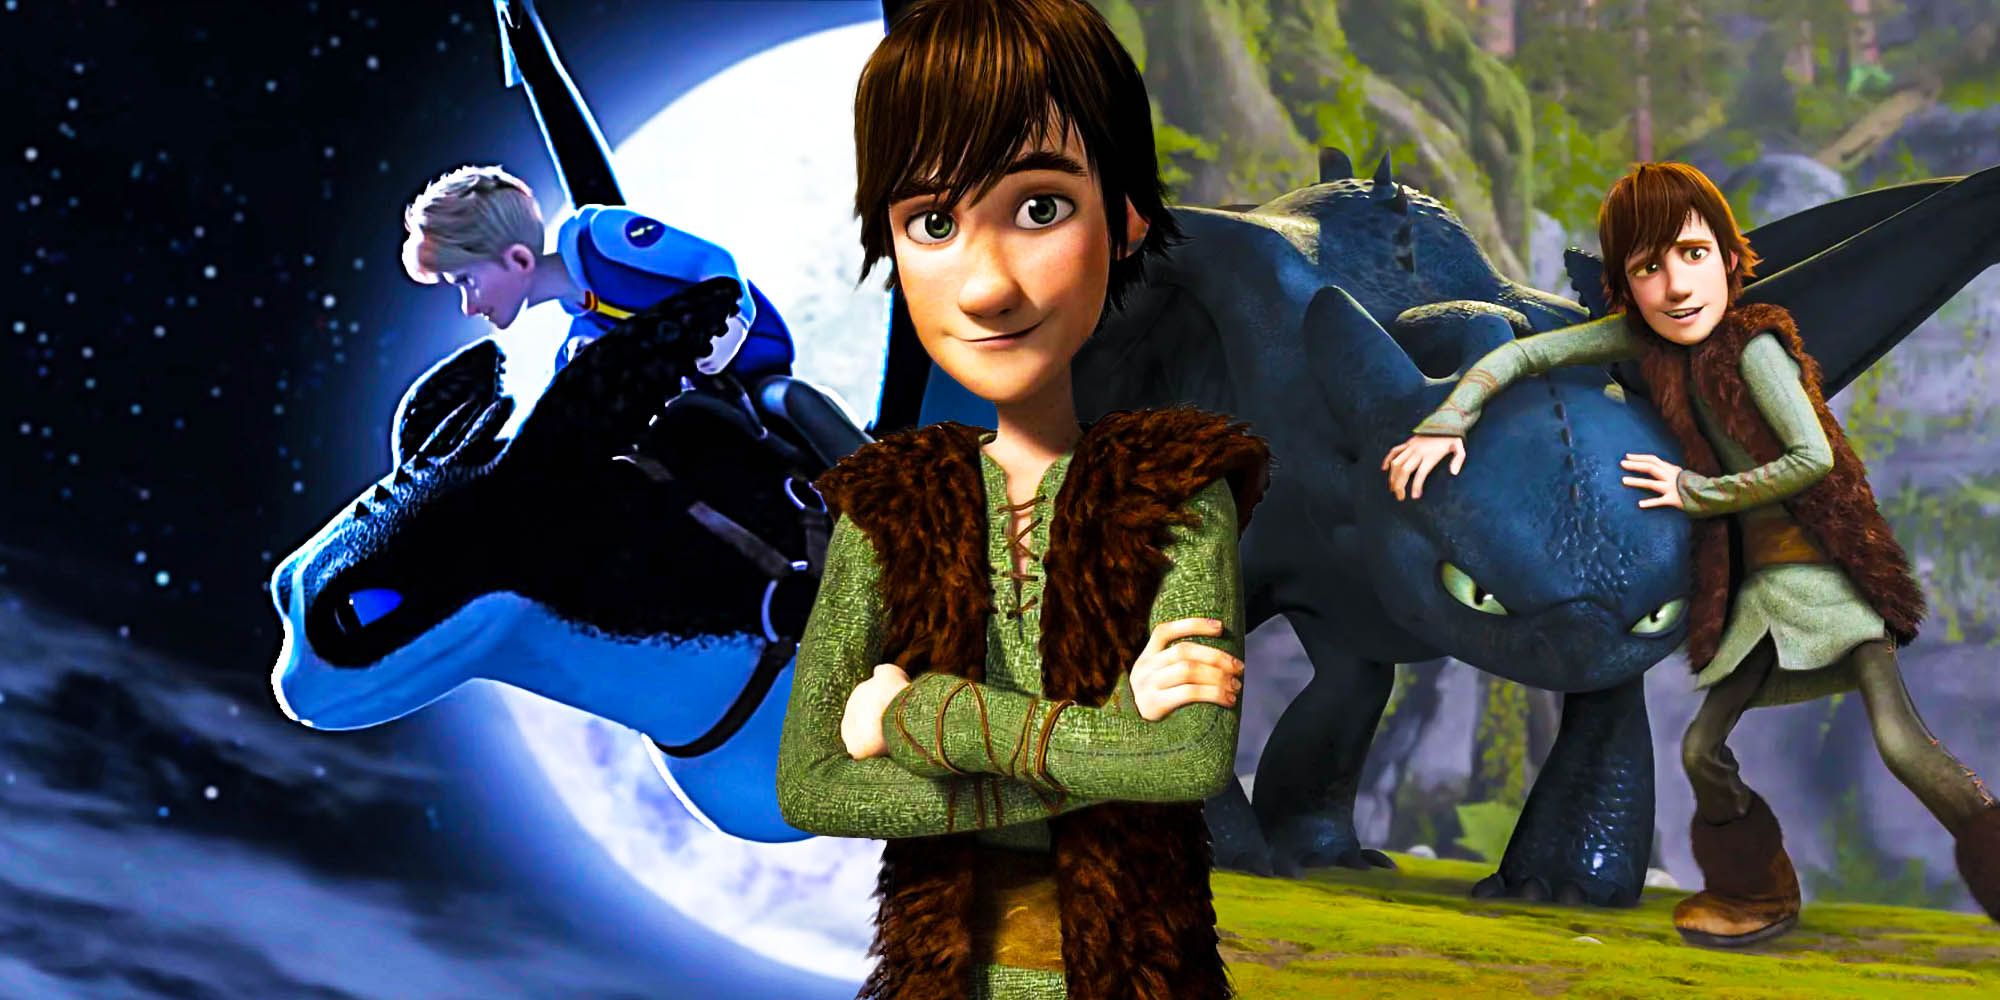 Dragons The Nine Realms Makes The Original How To Train Your Dragon Tragic